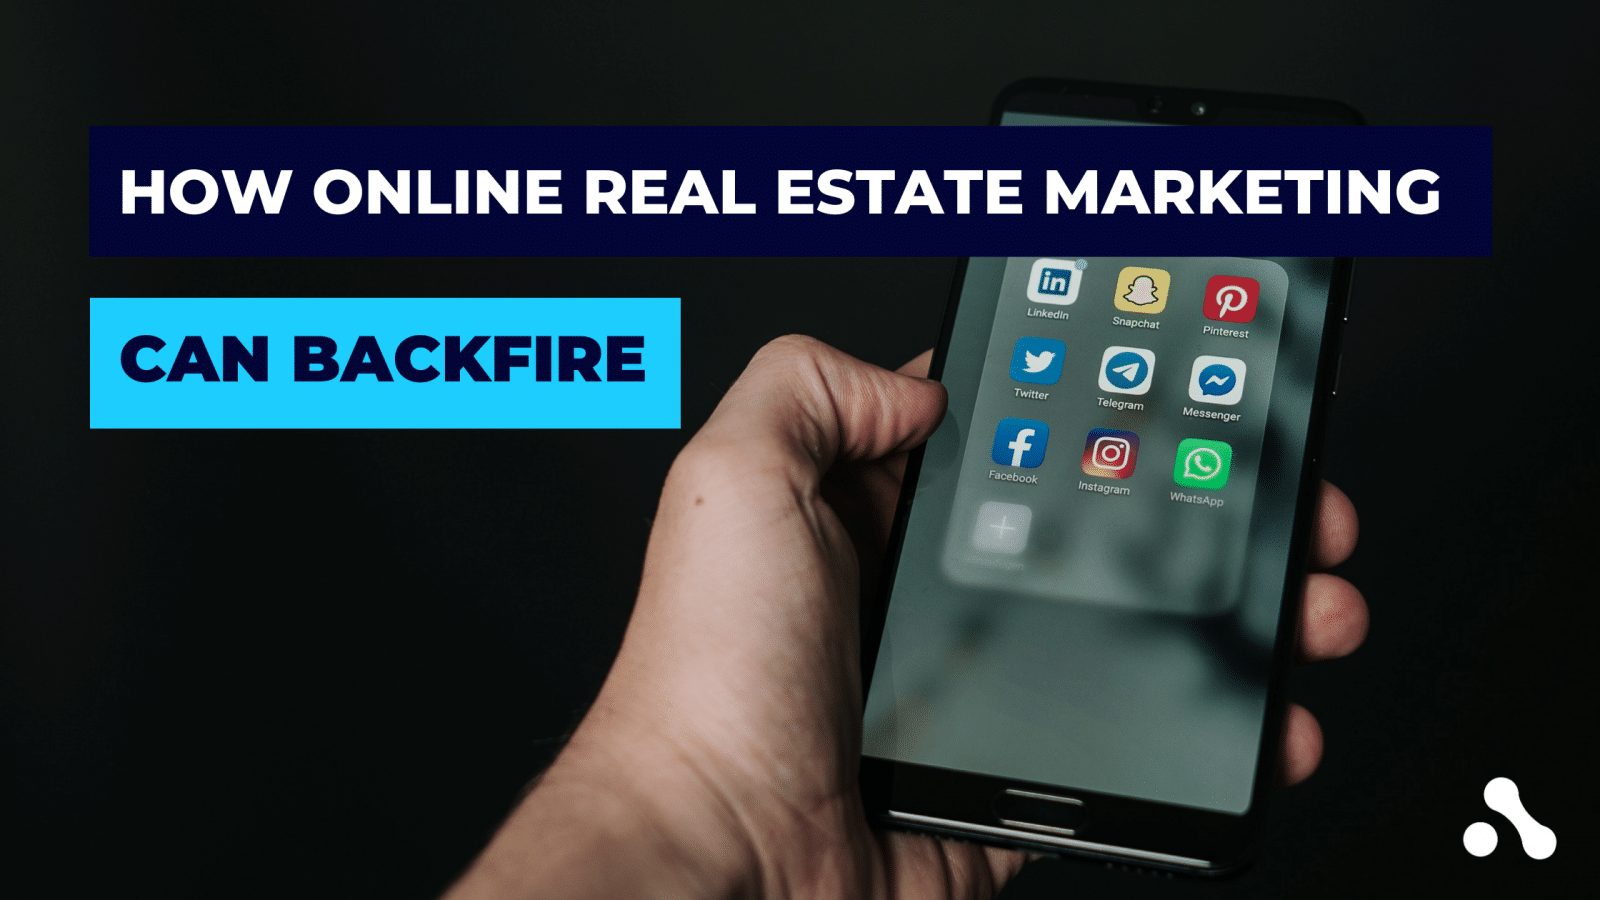 A real estate agent with a list of social media apps on their device